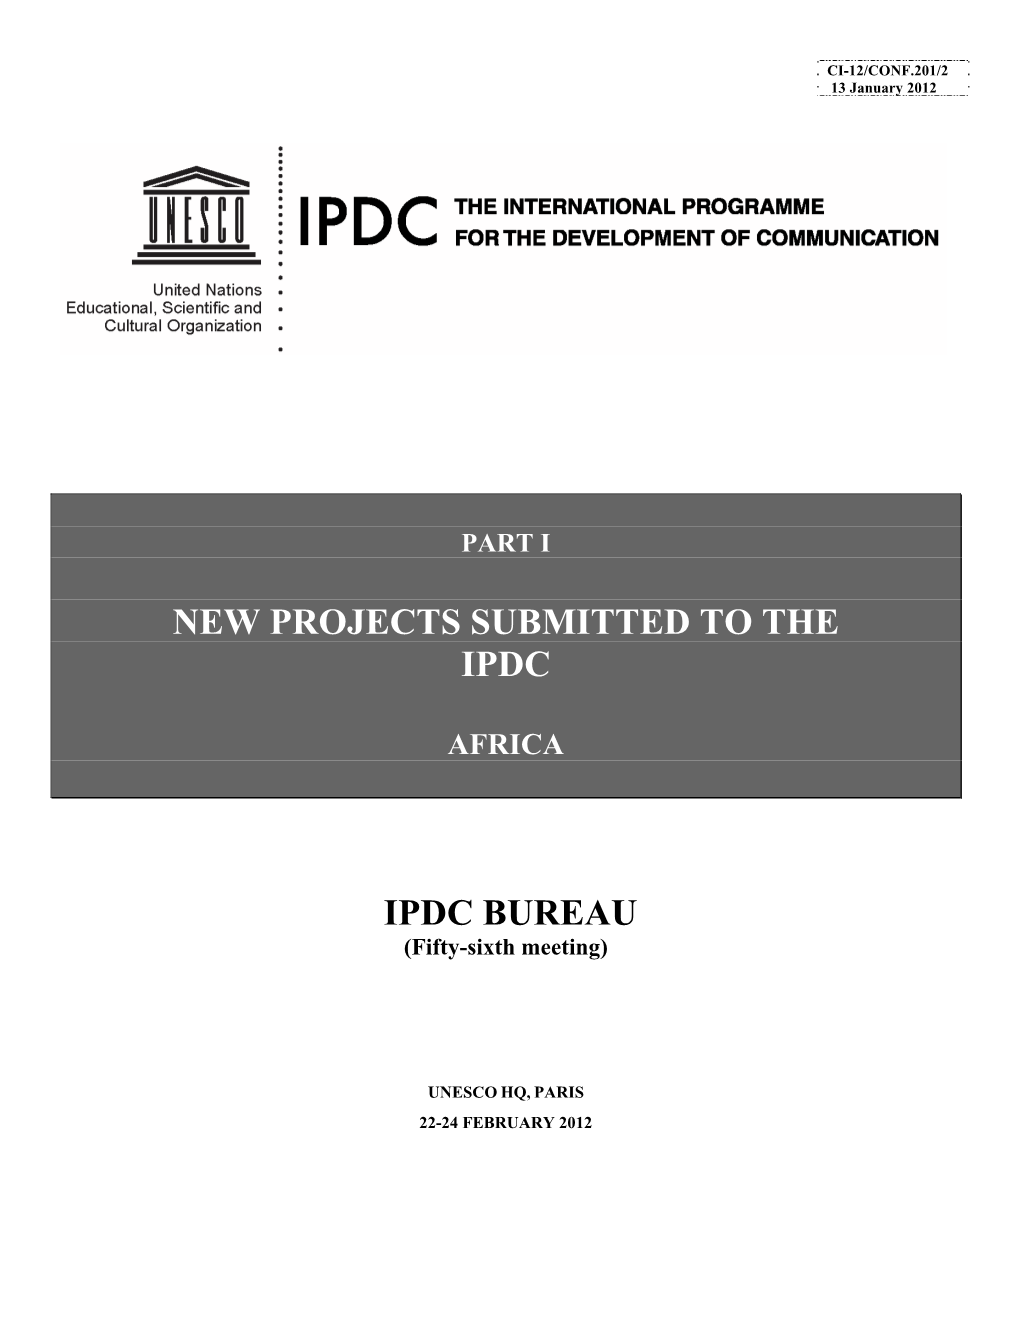 New Projects Submitted to the Ipdc Ipdc Bureau